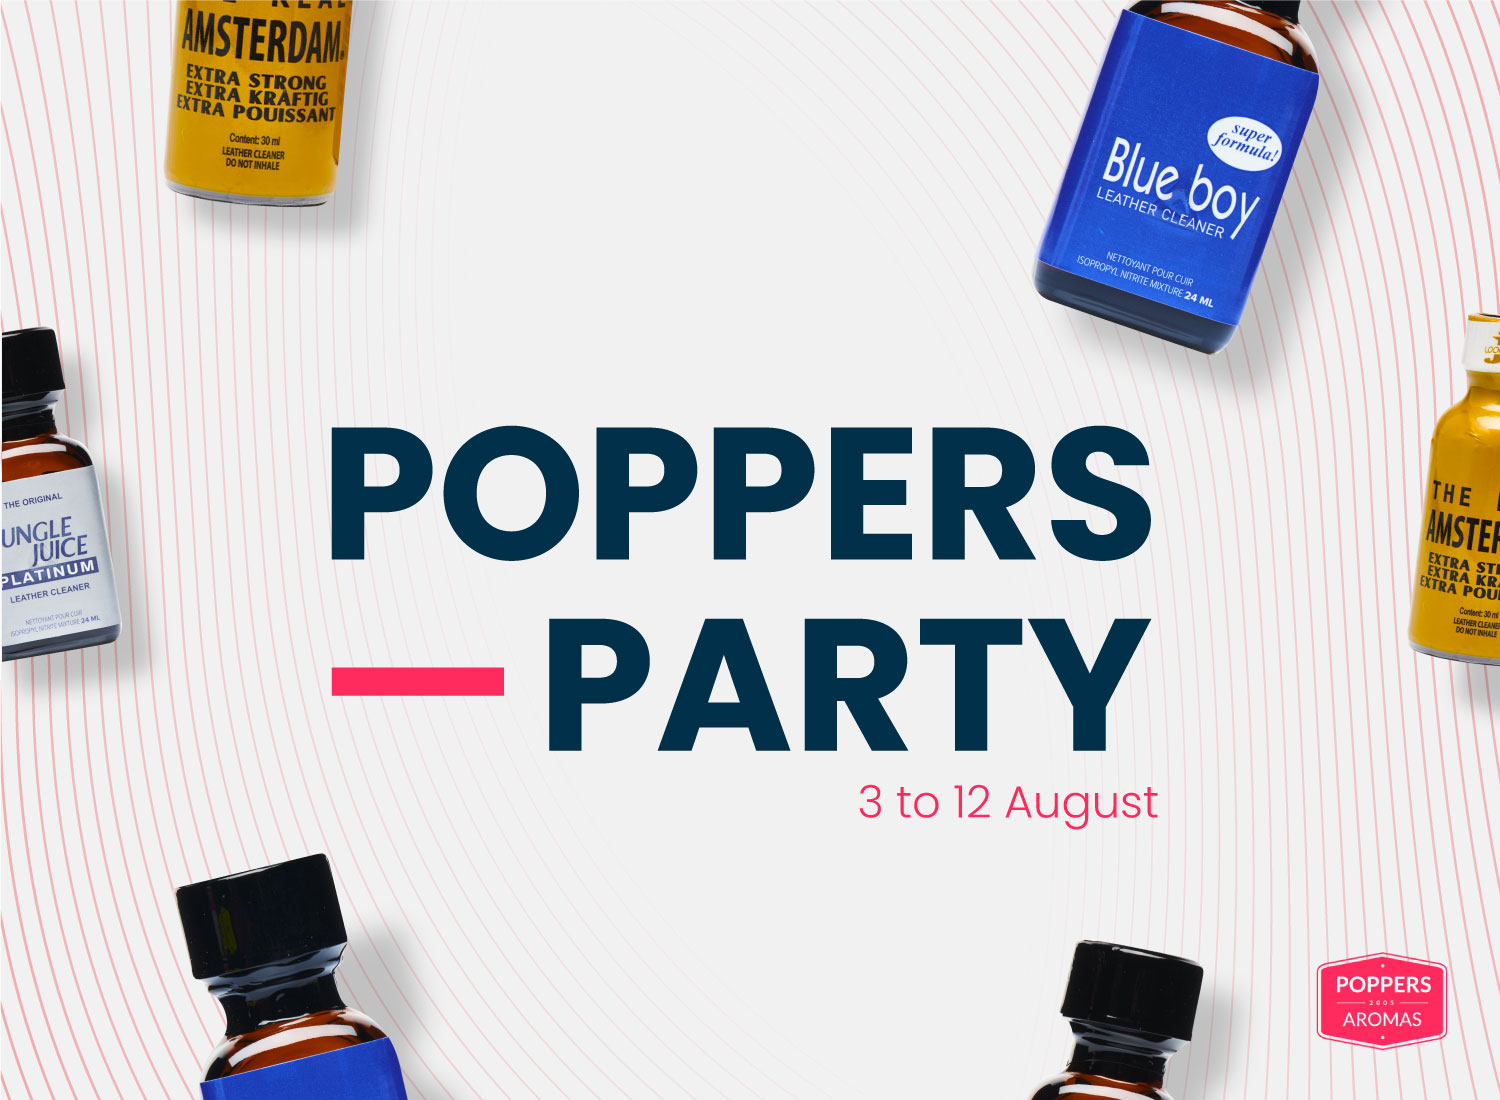 Poppers party sale on poppers aromas